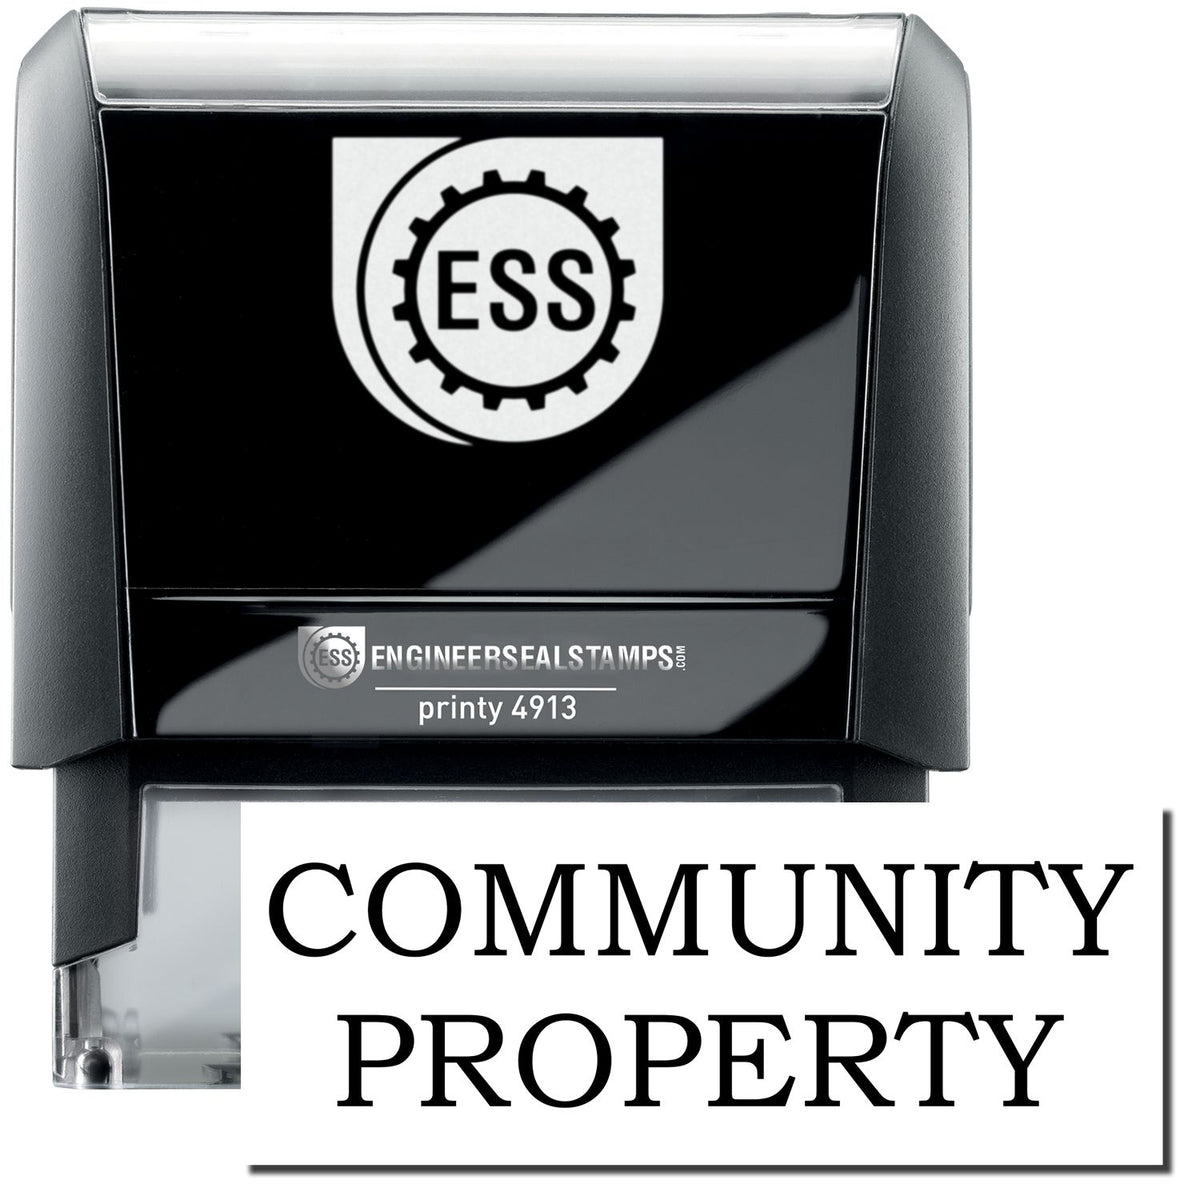 A self-inking stamp with a stamped image showing how the text &quot;COMMUNITY PROPERTY&quot; in a large bold font is displayed by it.